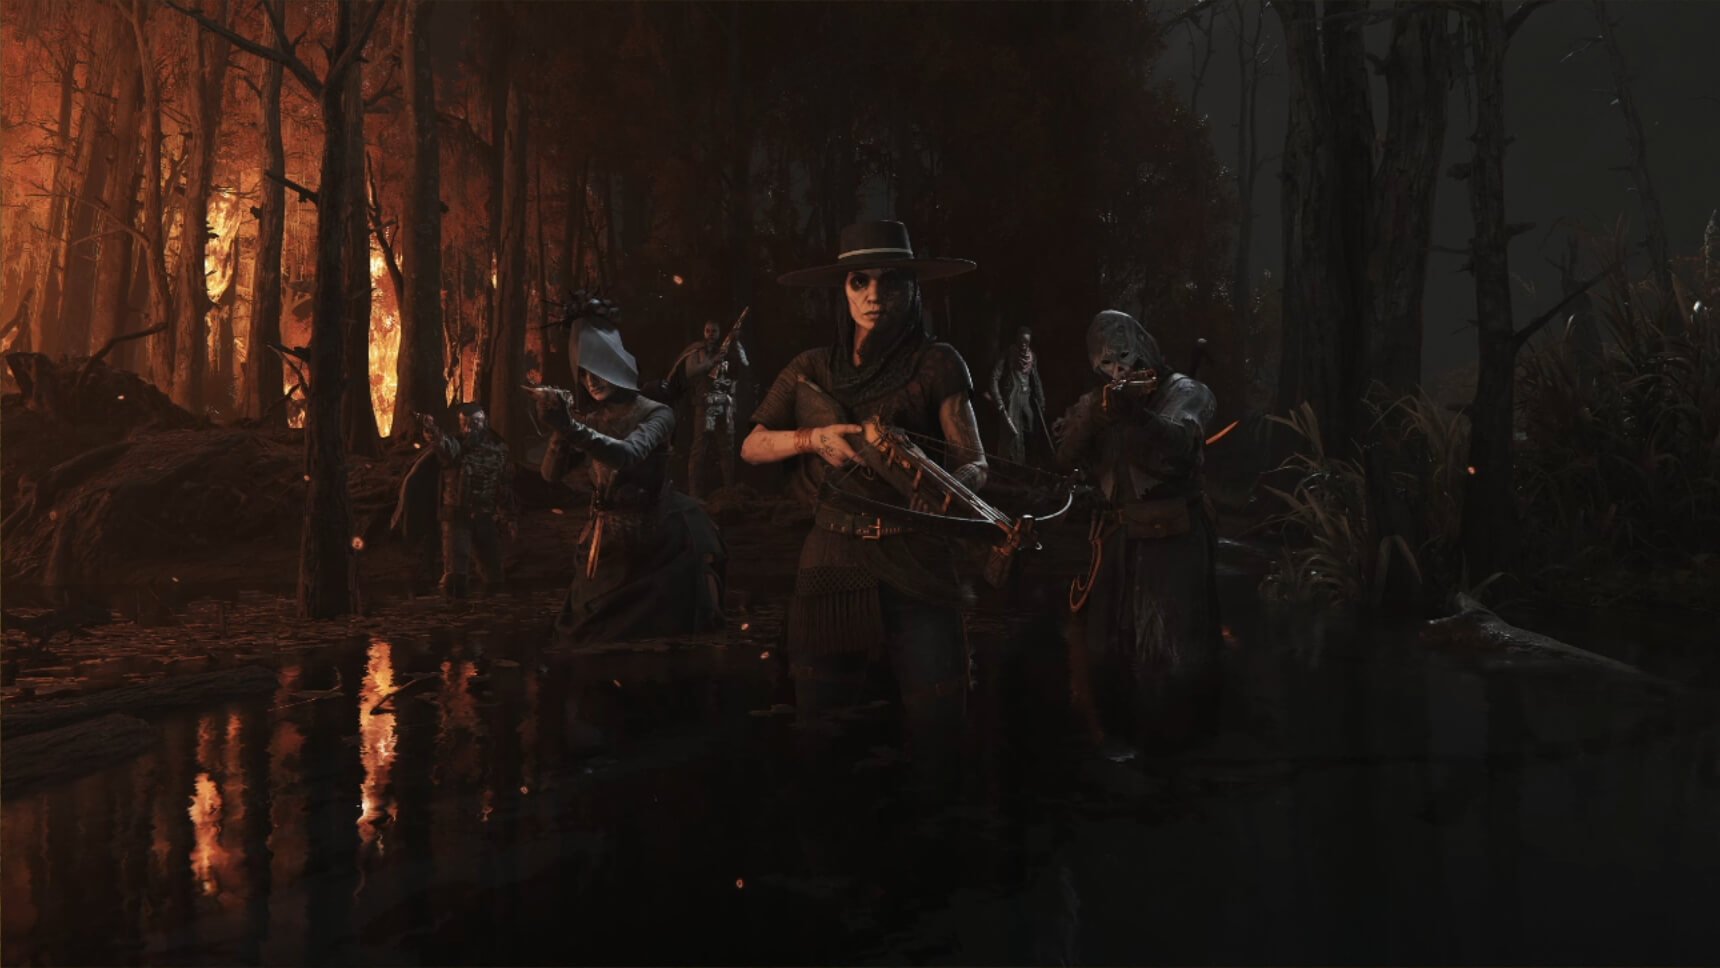 Hunt Showdown Gets One of the Biggest Updates, Adding New